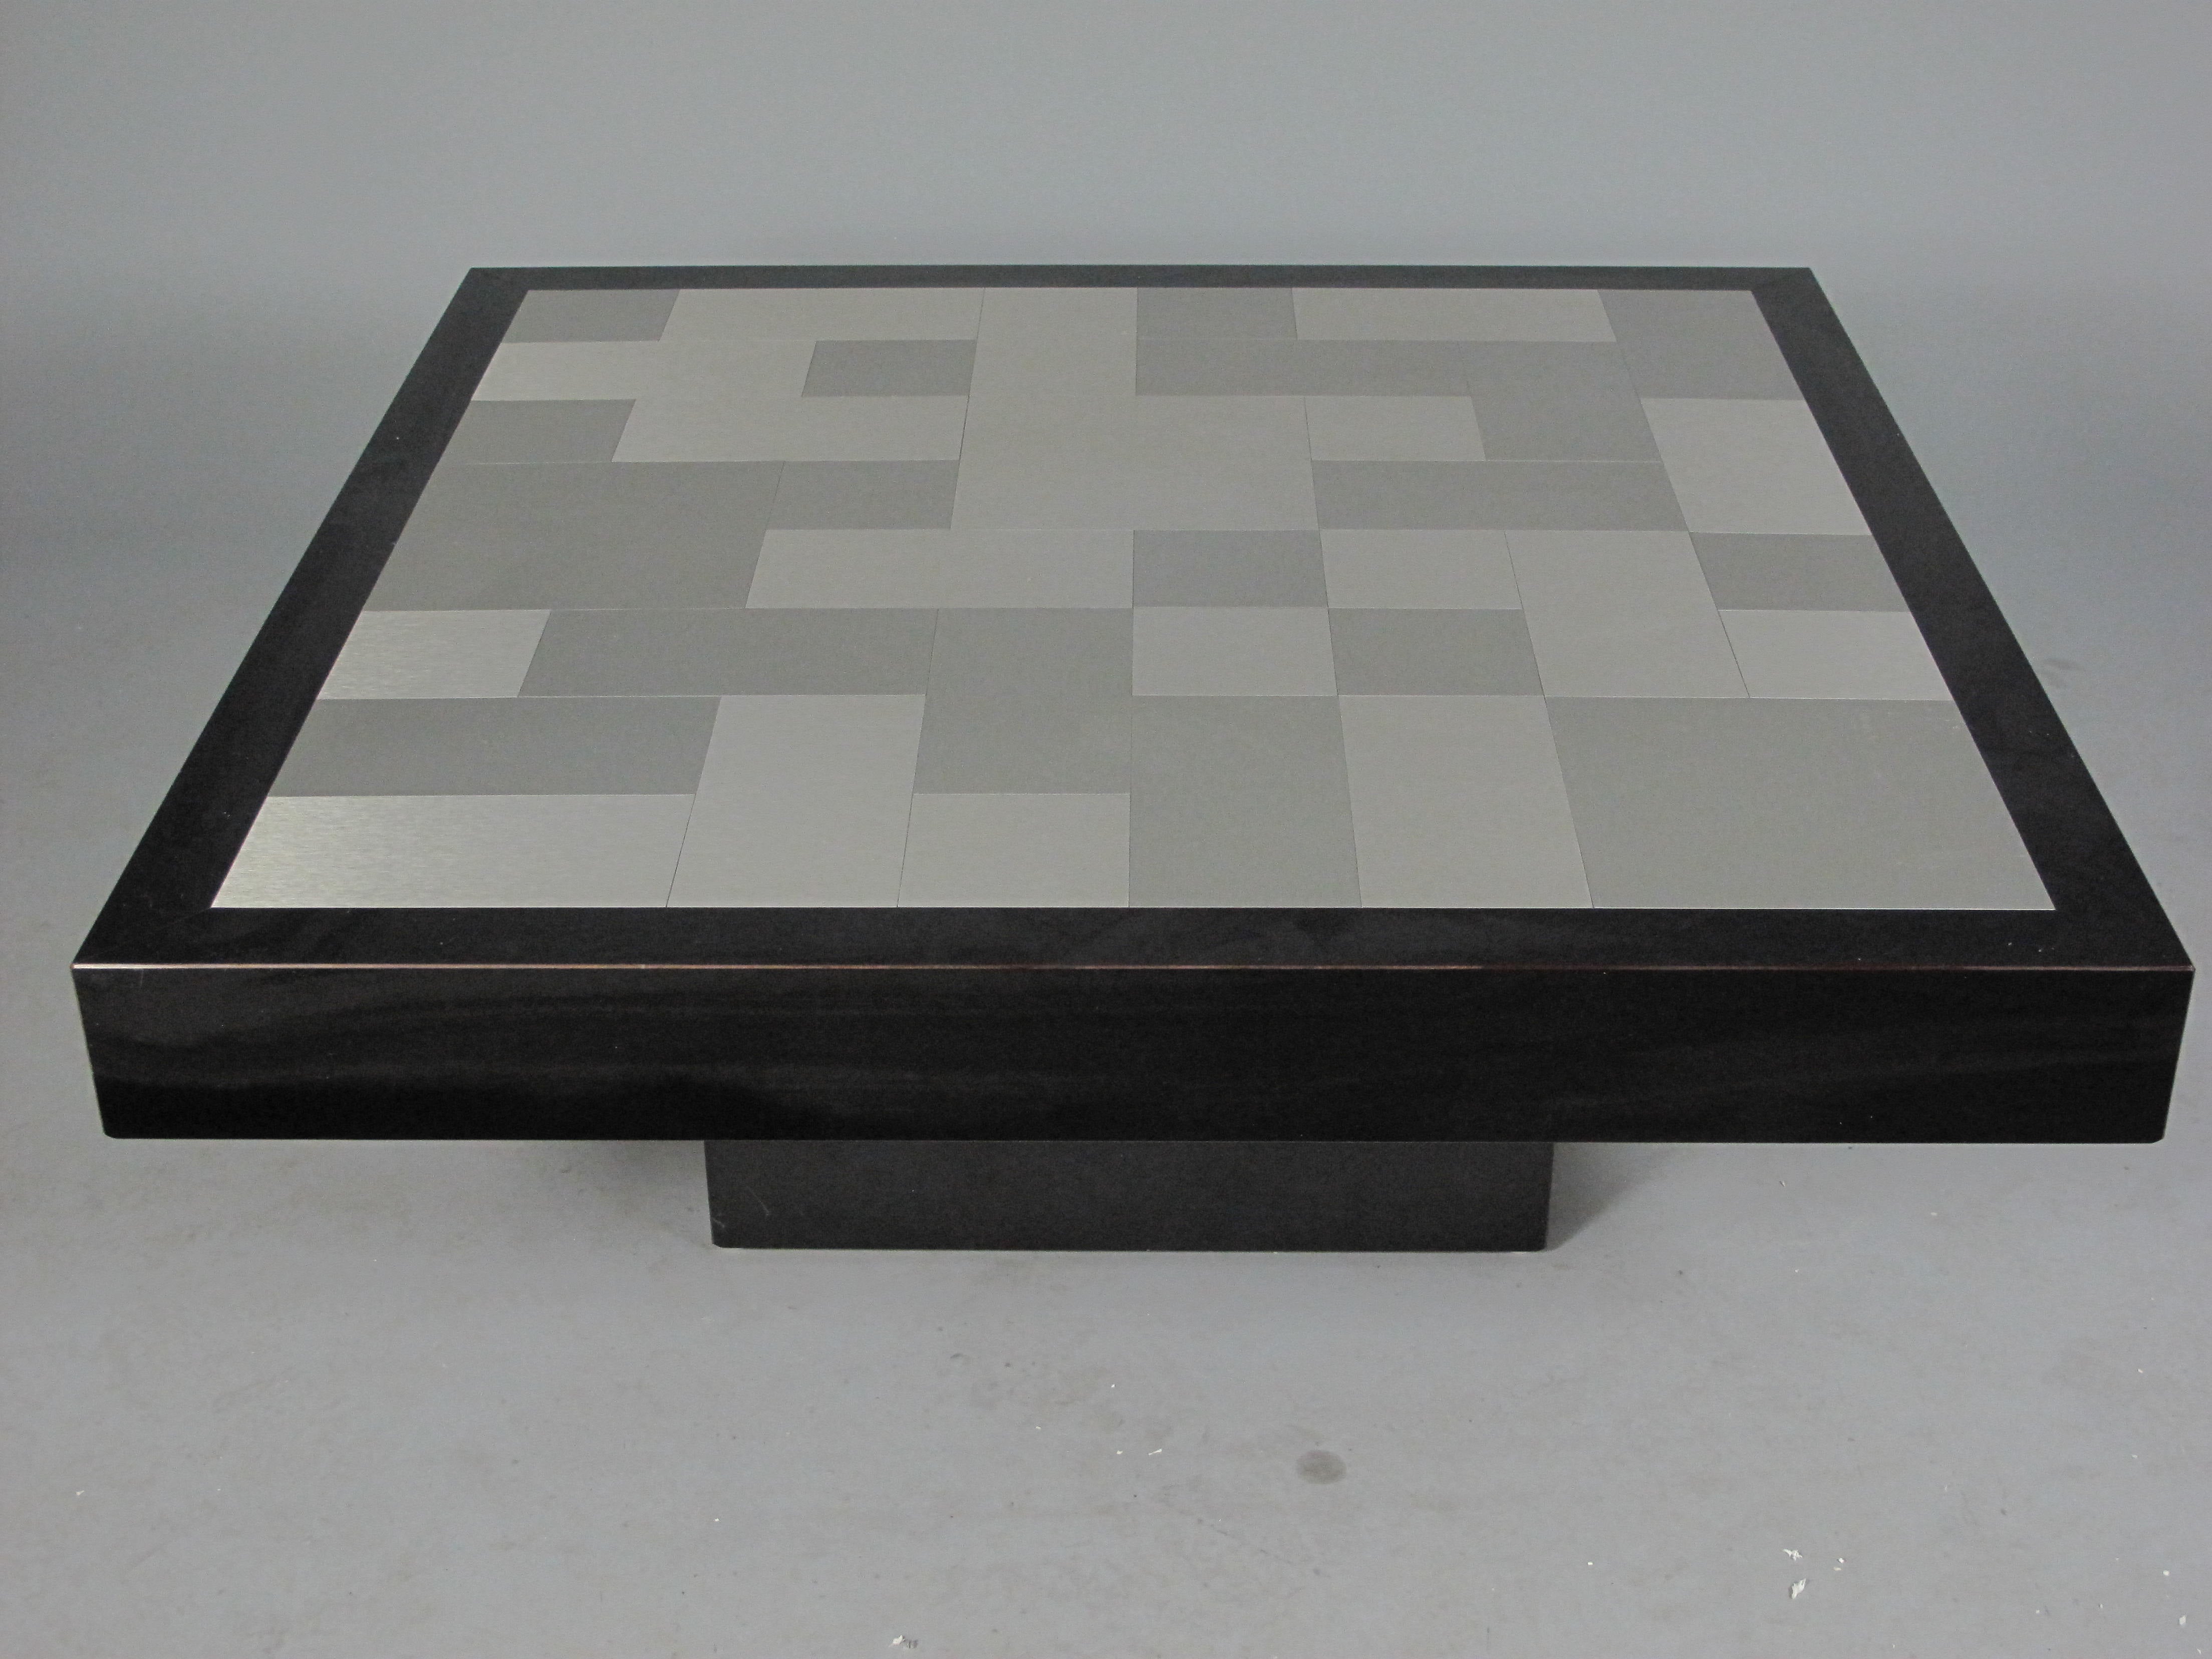 Vintage French Square Coffee Table with Stainless Steel Tile Top